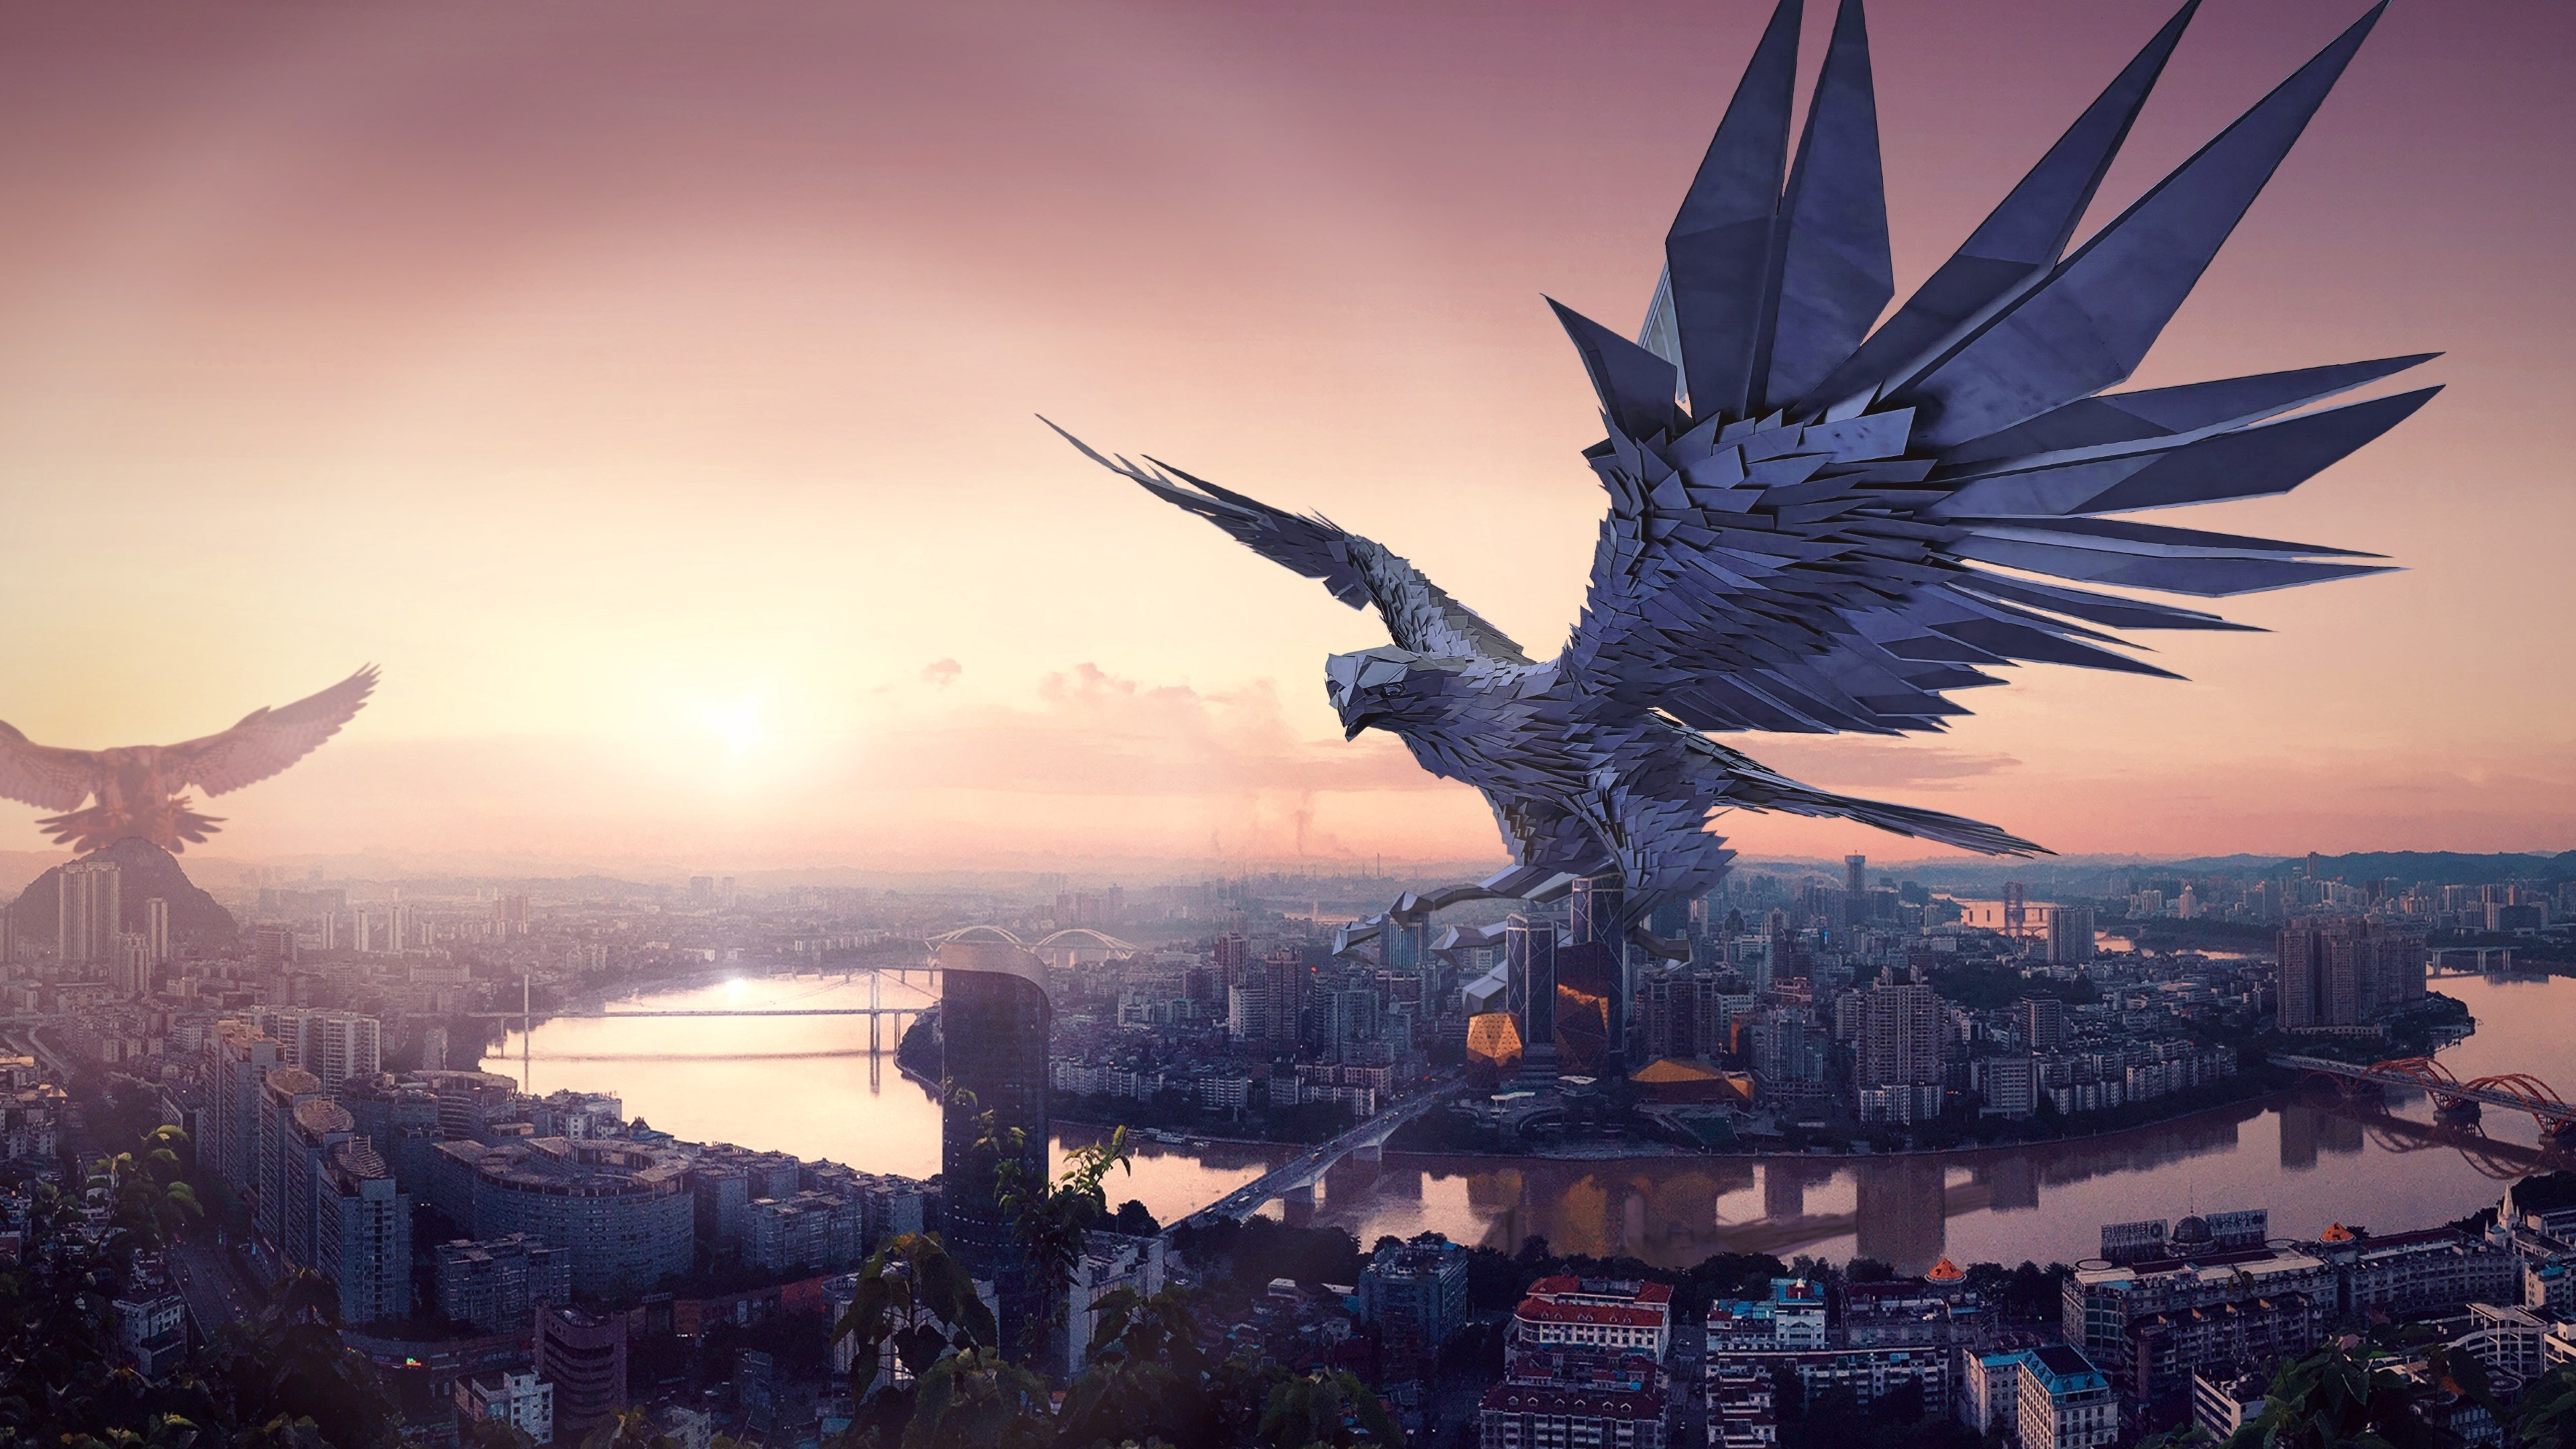 The falcon, protector of the city wallpaper 3840x2160